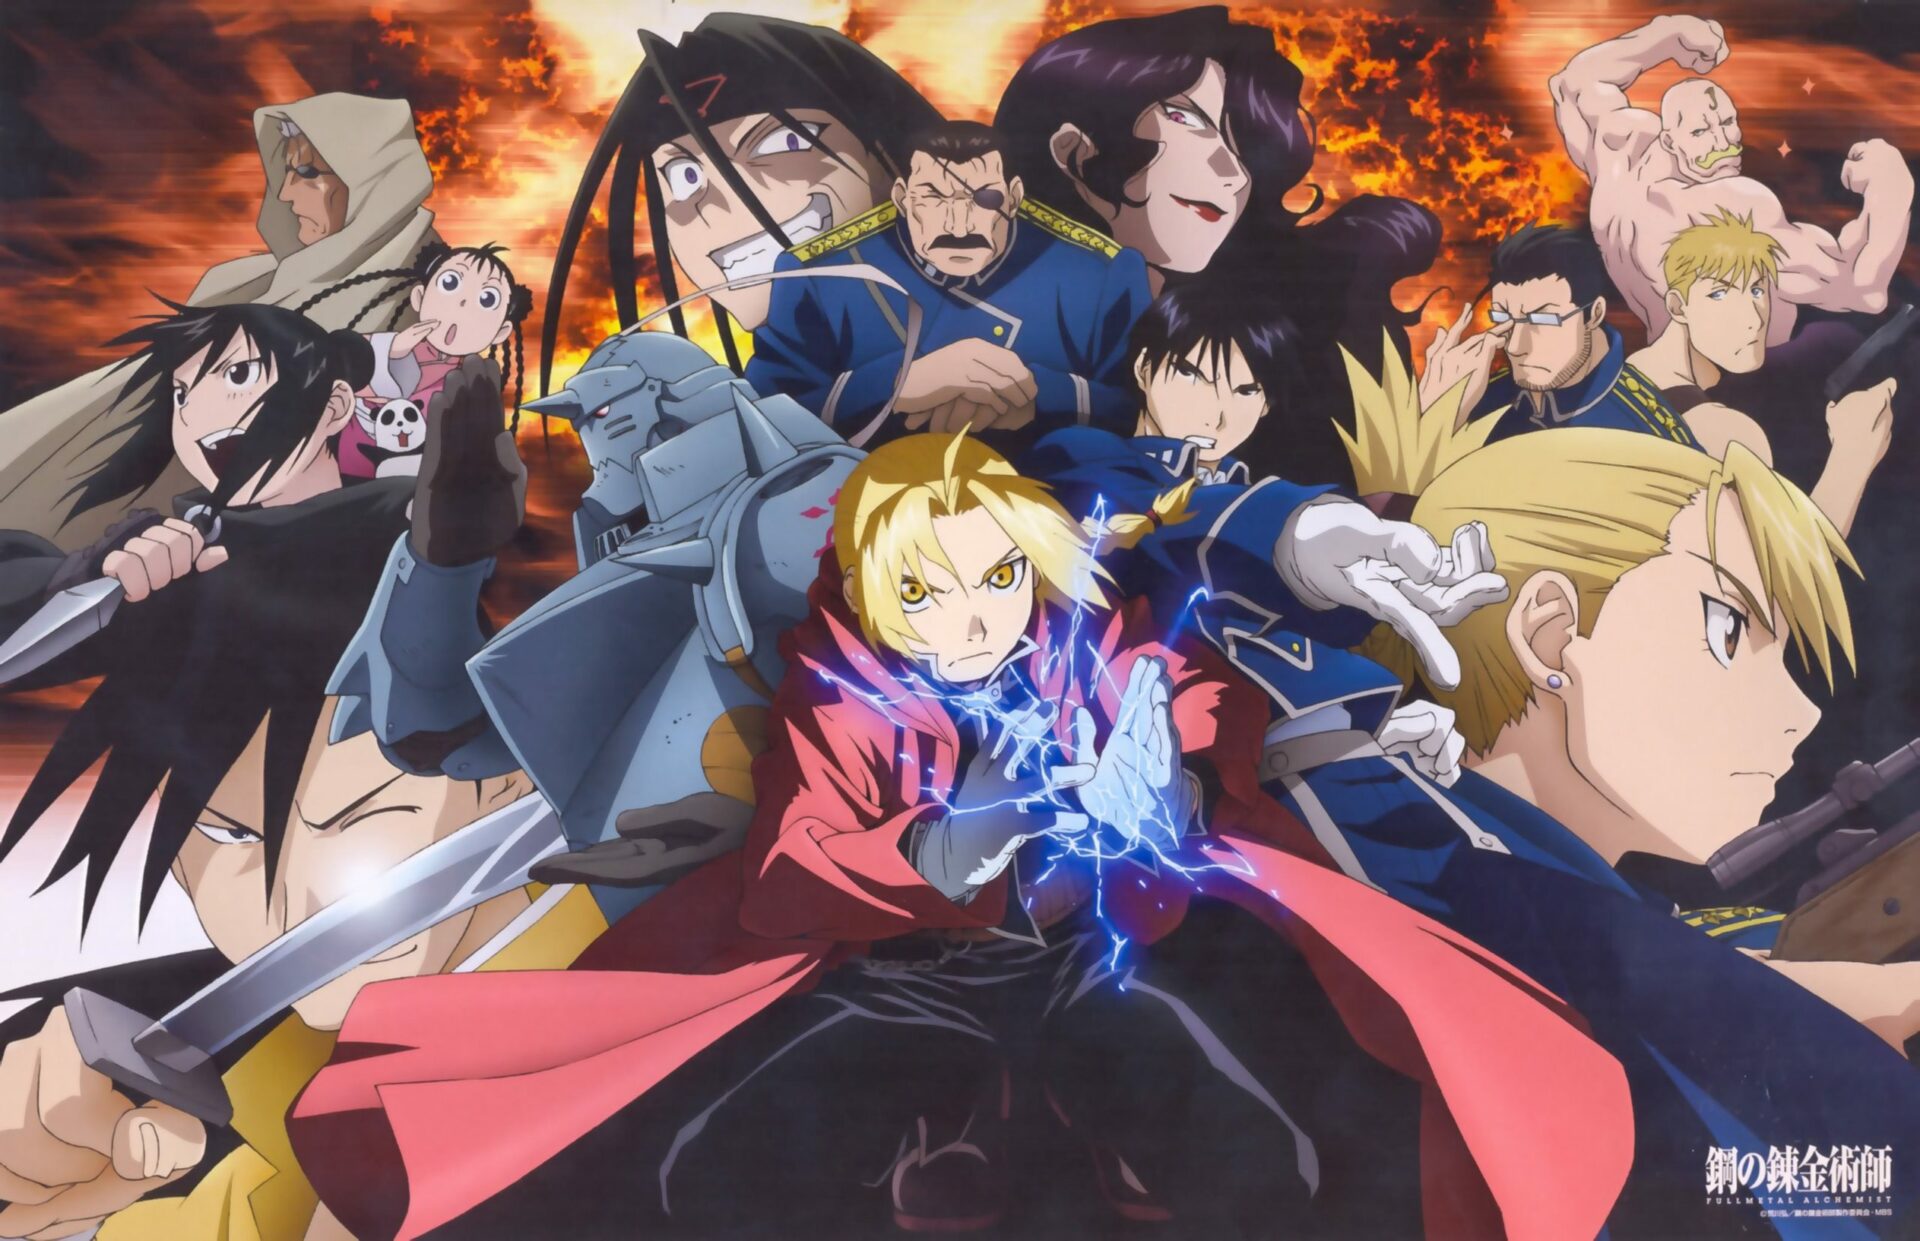 Top 20 Action Anime On Hulu & Where To Watch Them!